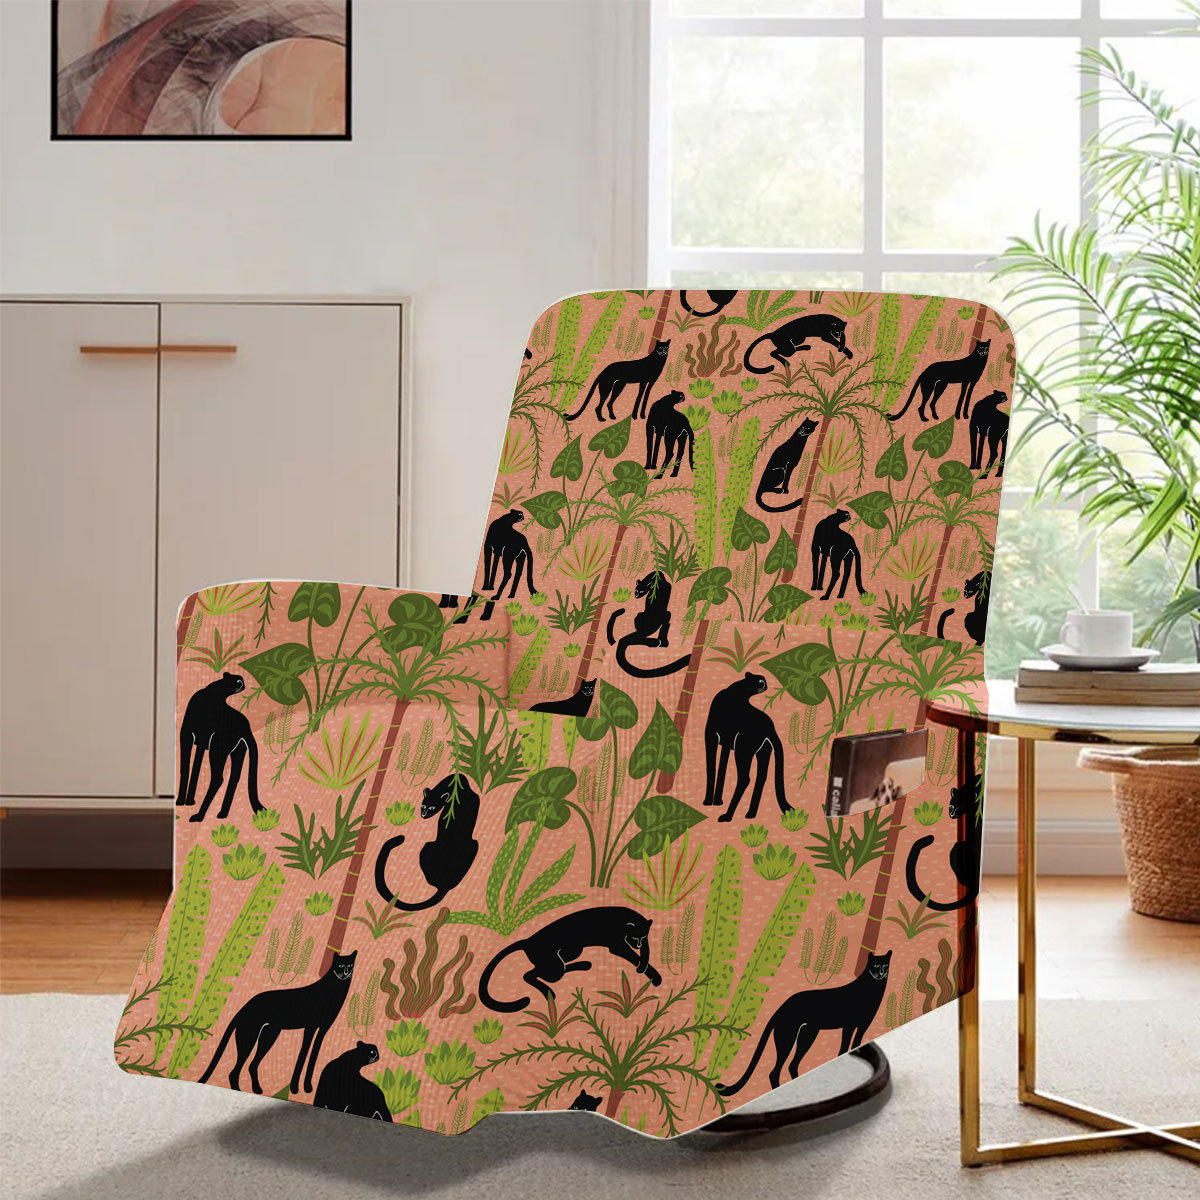 Jungle Black Panther Recliner Slipcover